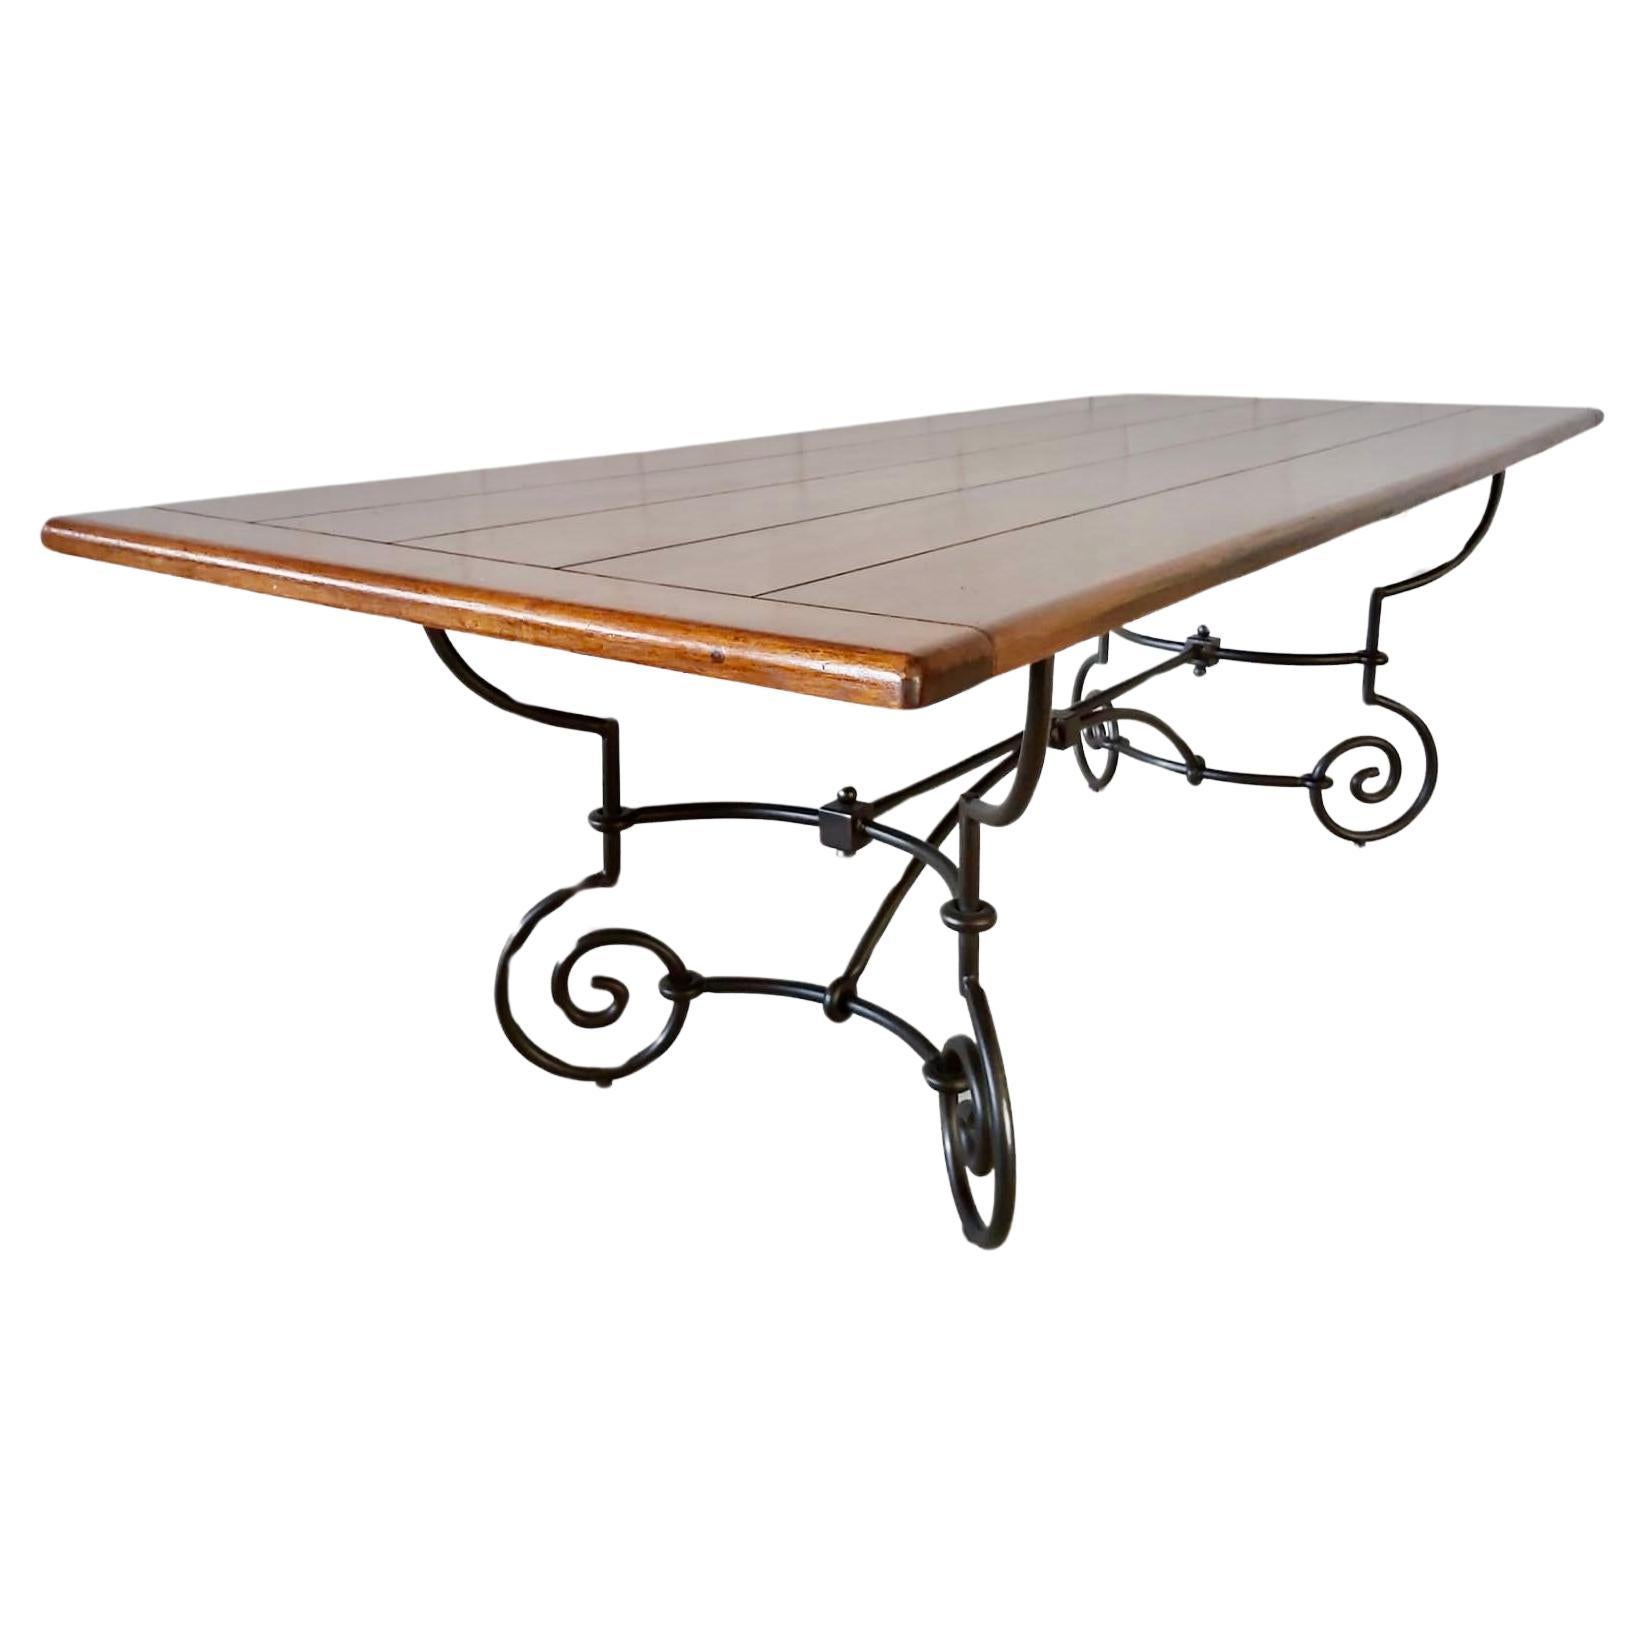  French Wrought Iron and Oak Dining Table